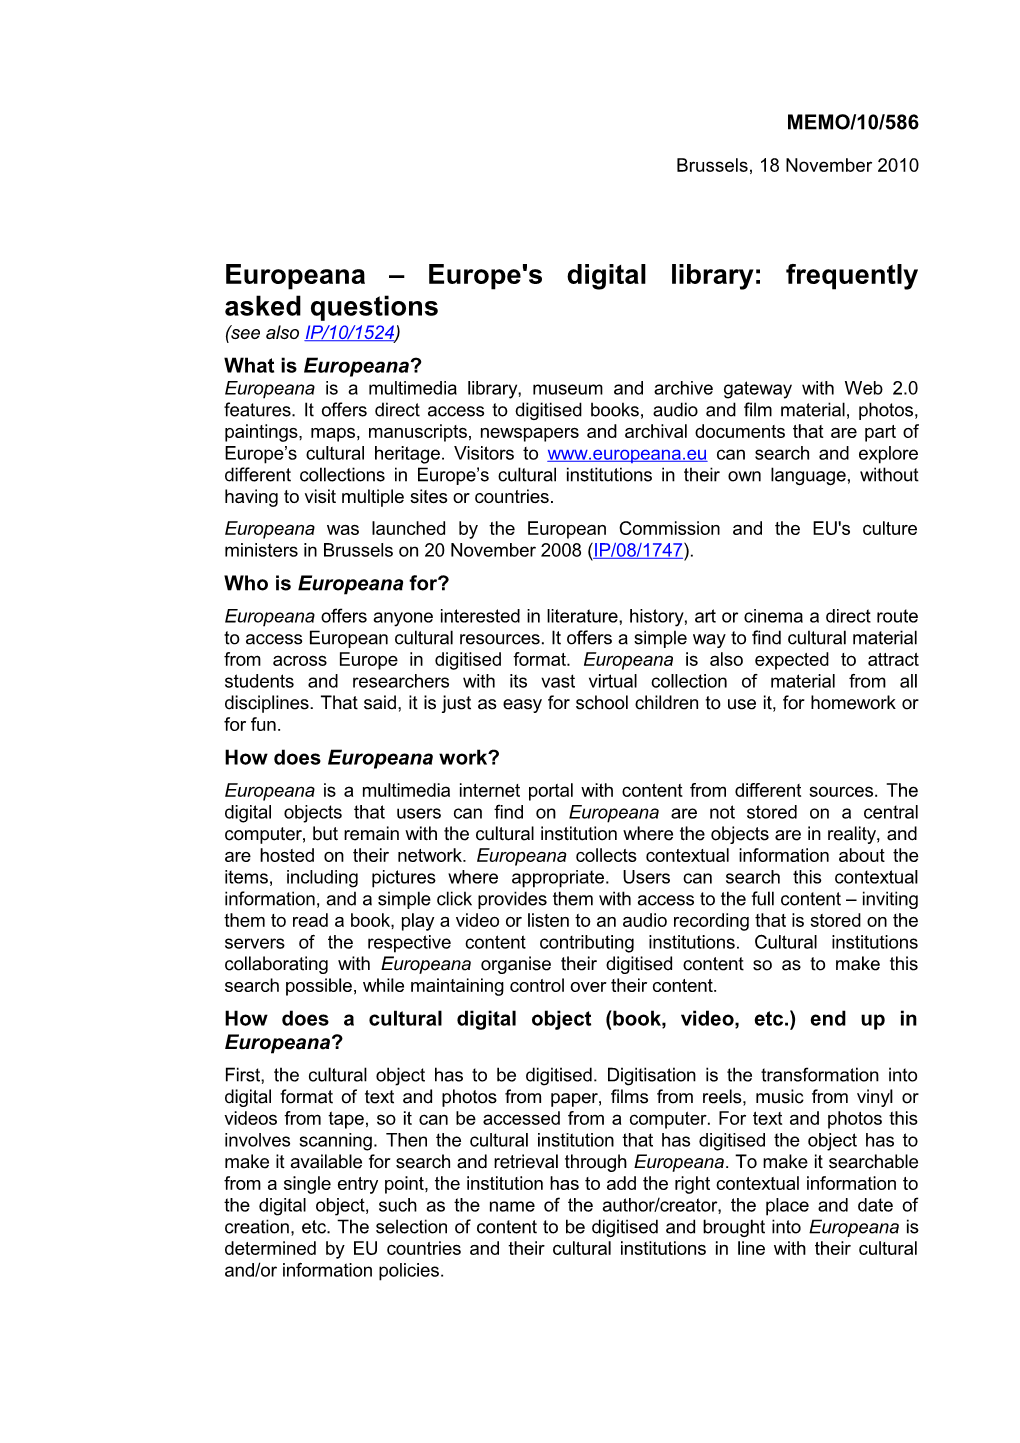 Europeana Europe's Digital Library: Frequently Asked Questions